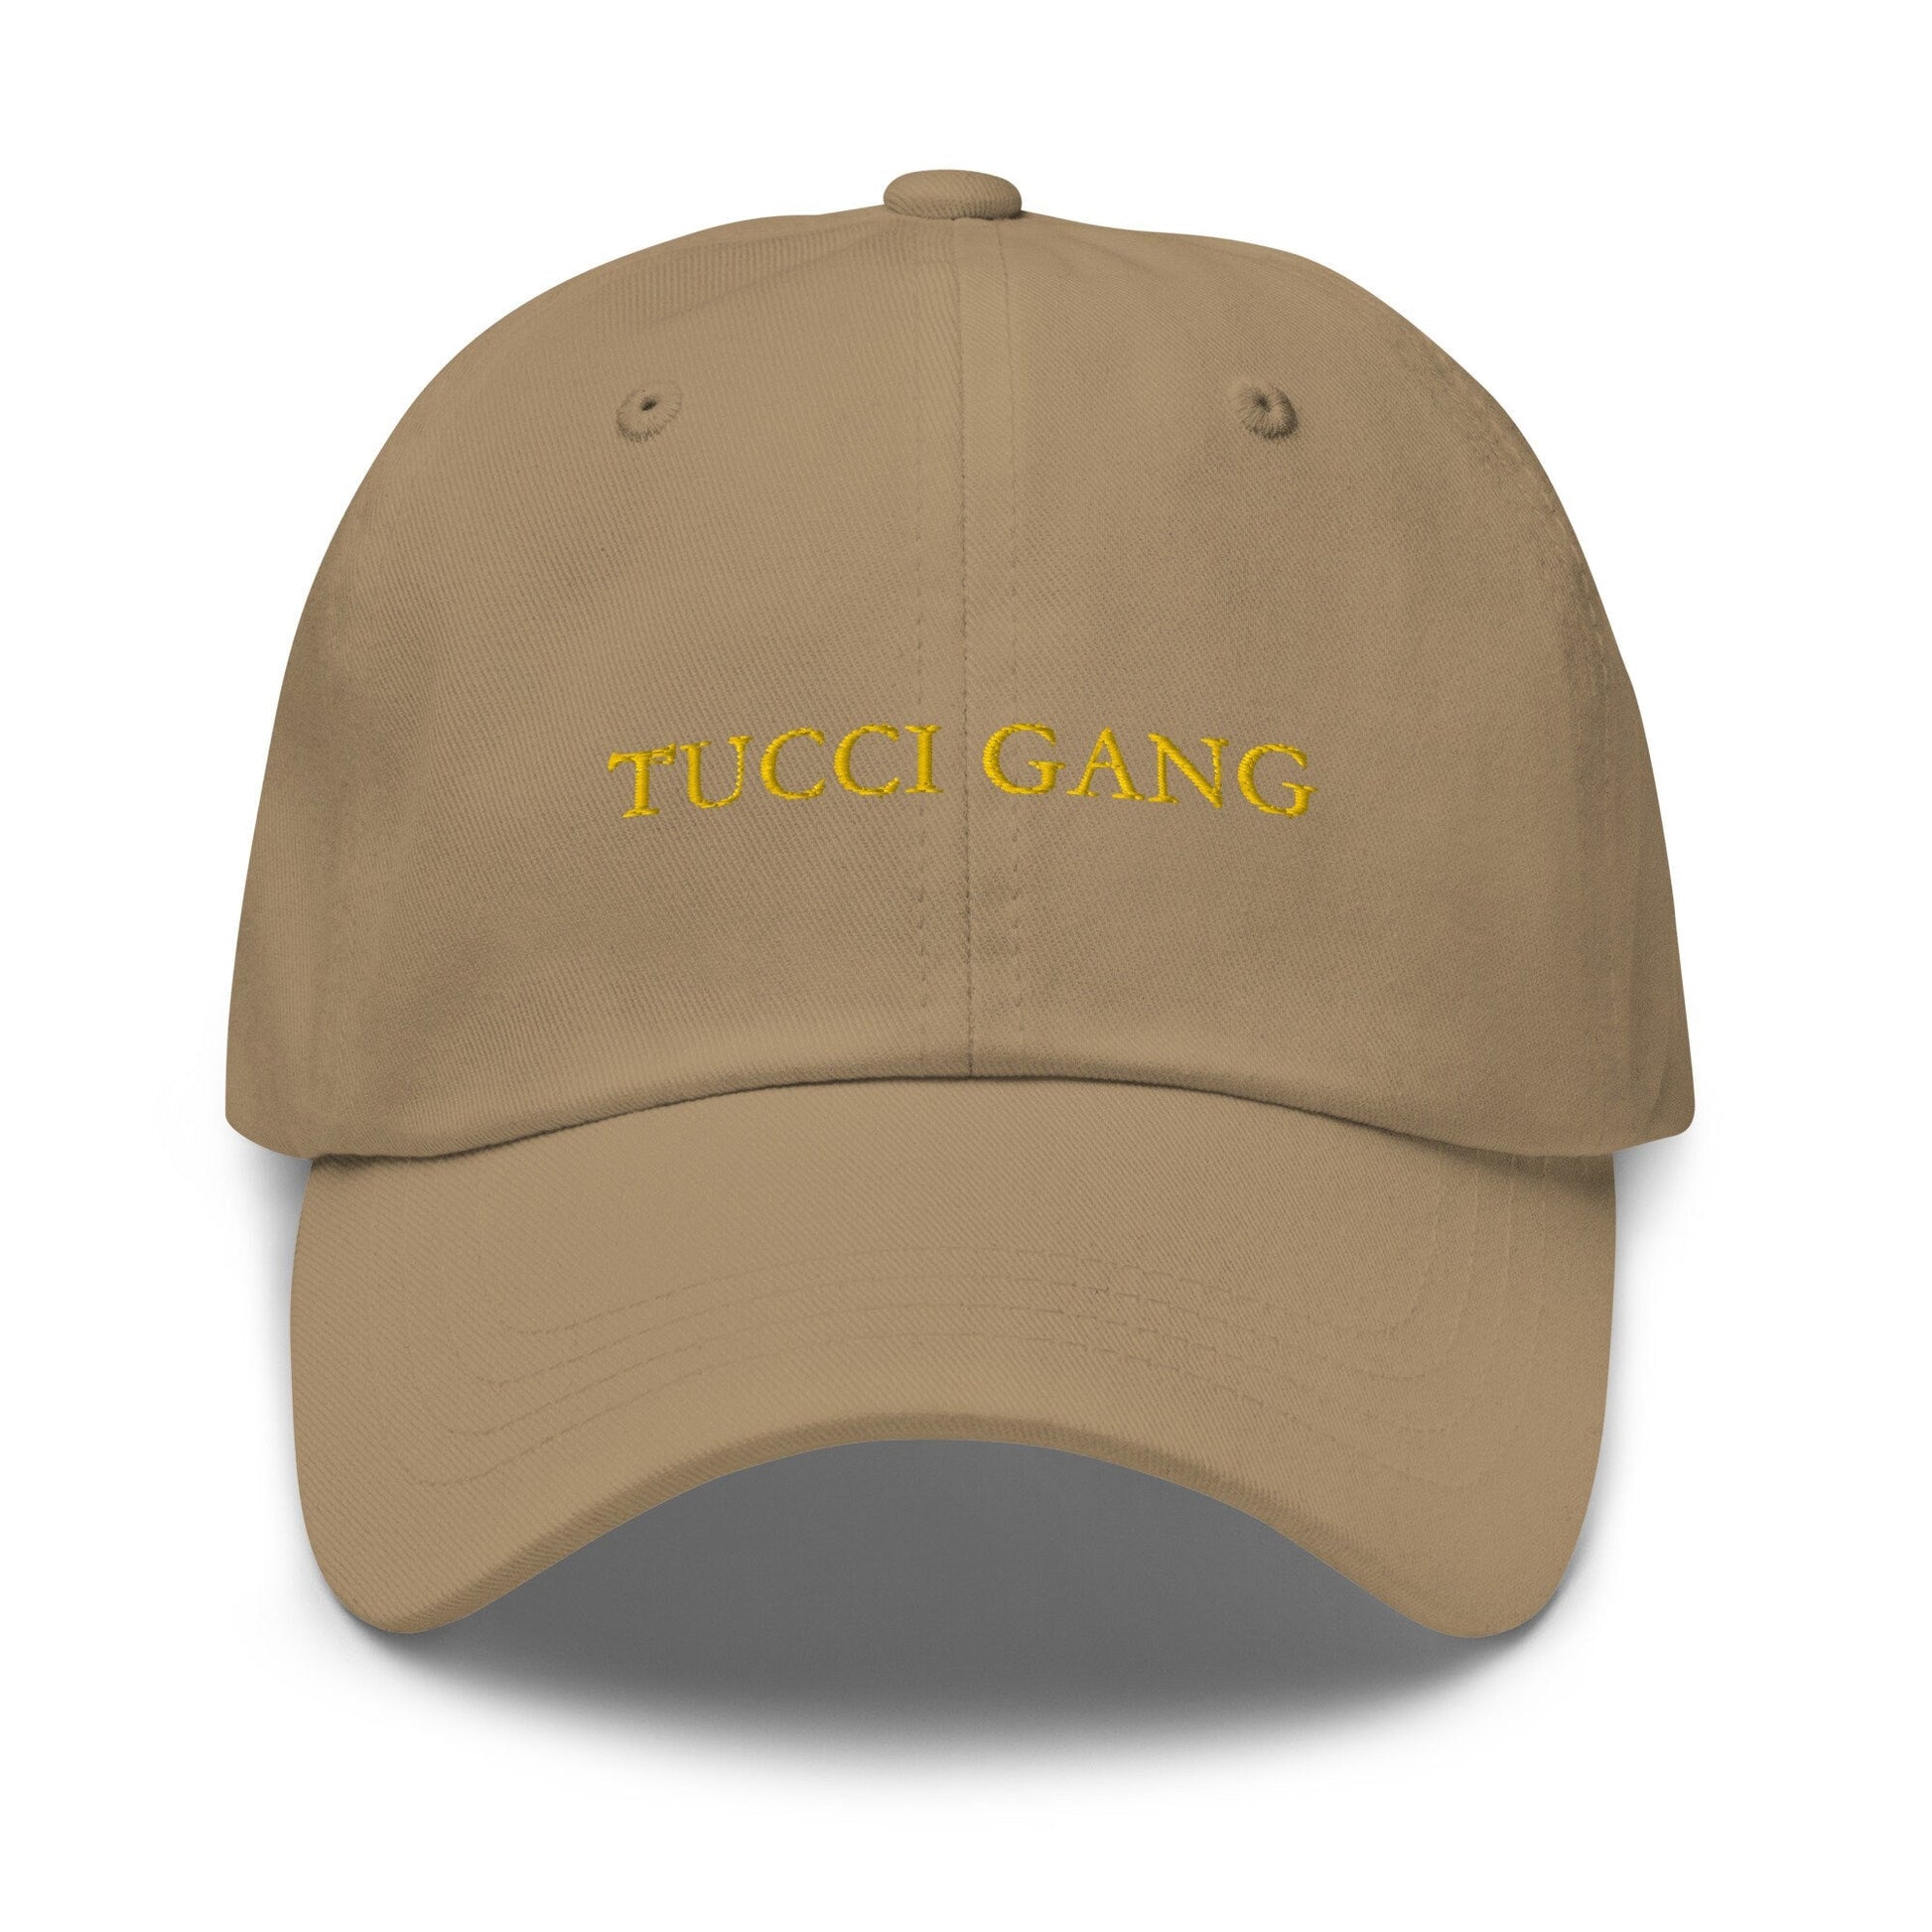 Stanley Tucci Hat - Tucci Gang - Minimalist Embroidered Cotton Cap - Evilwater Originals